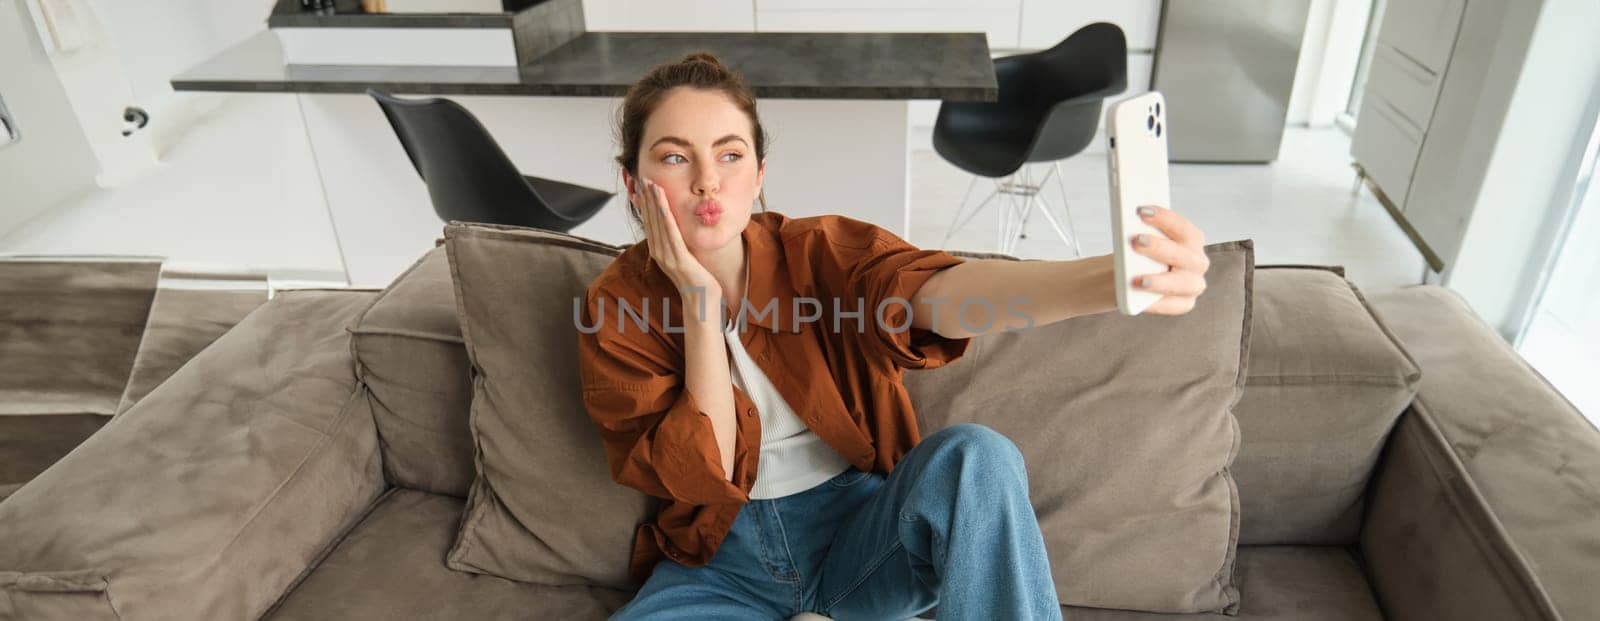 Portrait of cute smiling female model, takes selfie on smartphone app, posting photos on social media, using mobile phone camera, posing on sofa at home.